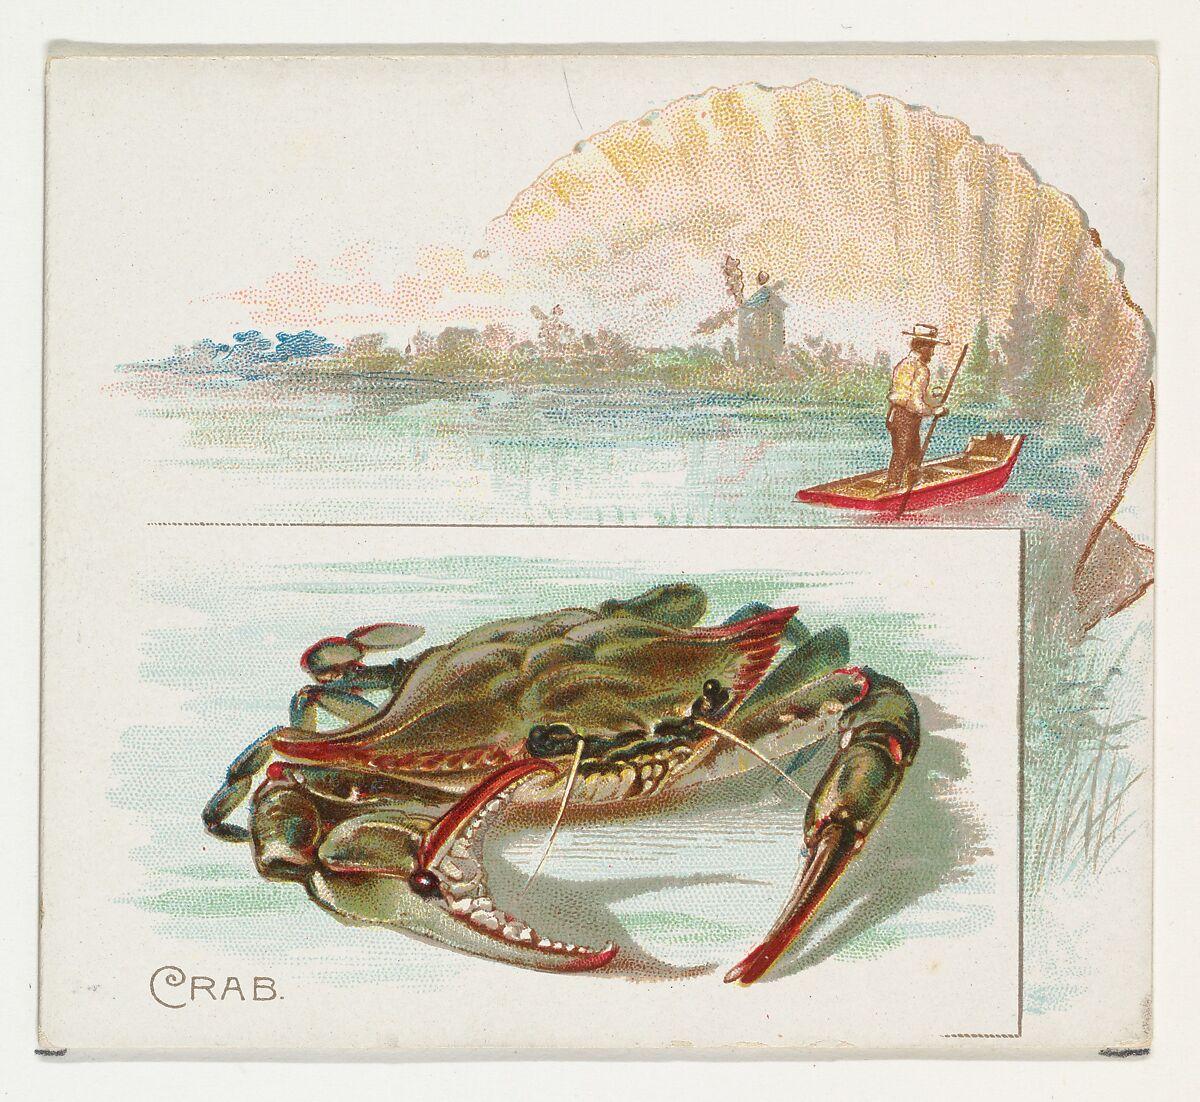 Crab, from Fish from American Waters series (N39) for Allen & Ginter Cigarettes, Issued by Allen &amp; Ginter (American, Richmond, Virginia), Commercial color lithograph 